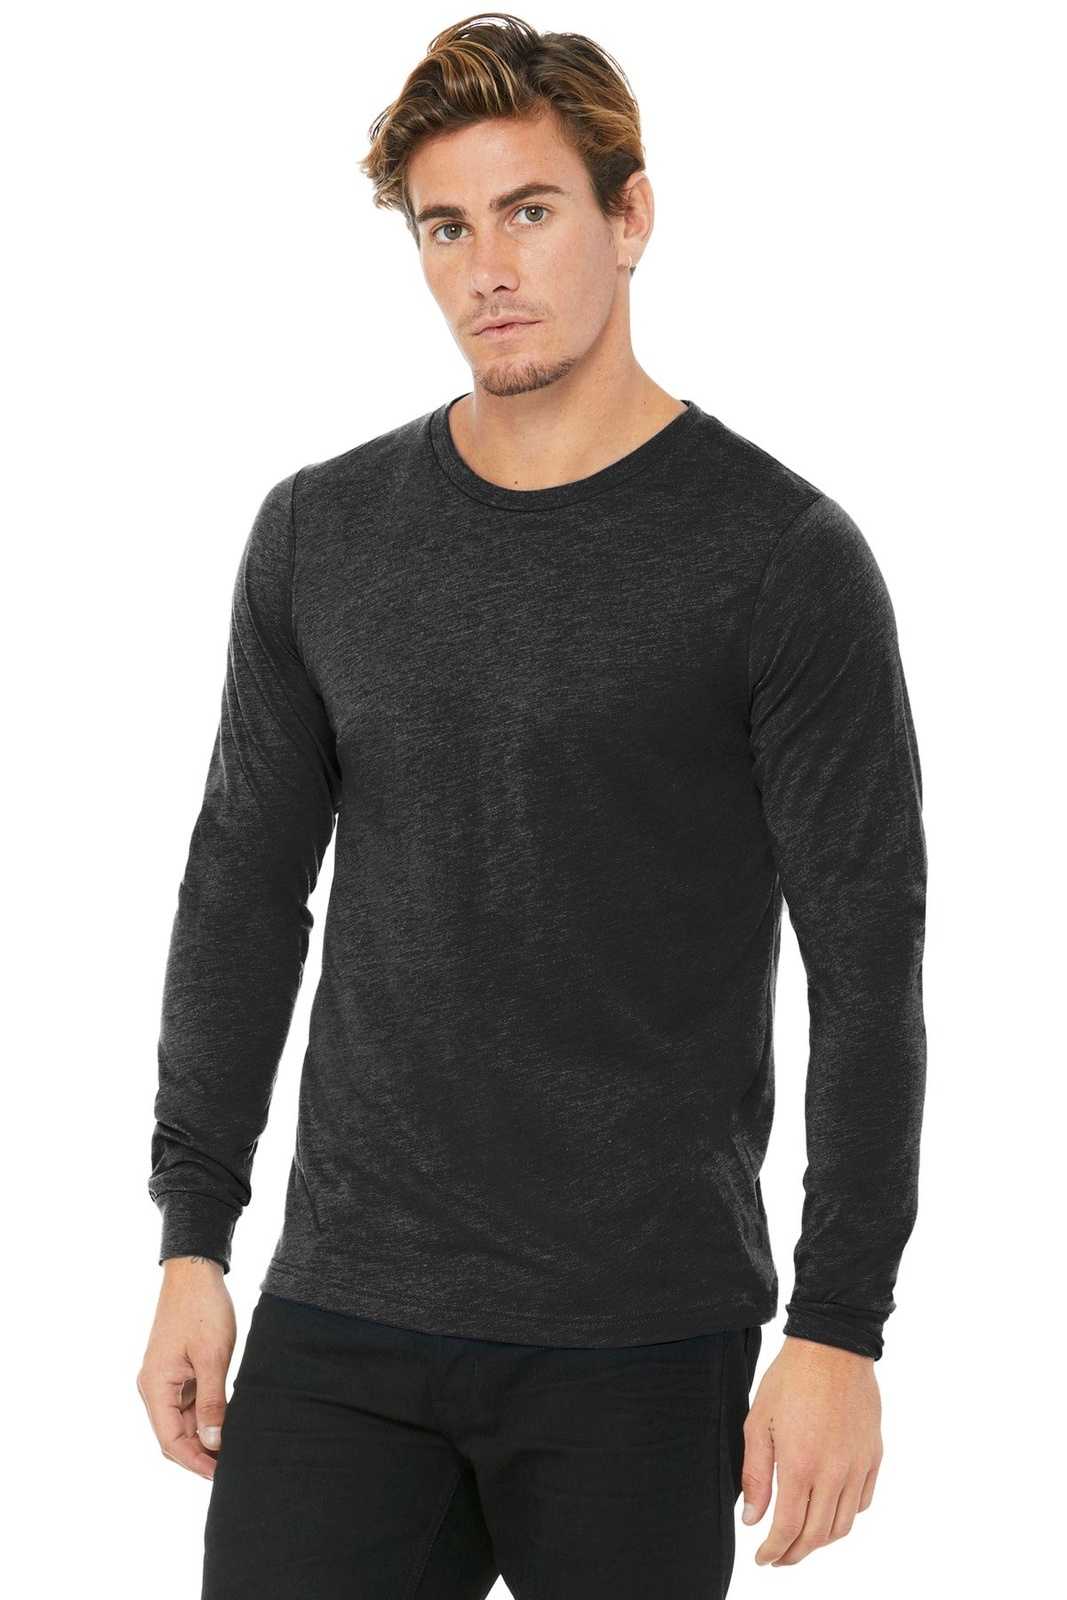 Bella + Canvas 3501 Unisex Jersey Long Sleeve Tee - Charcoal-Black Triblend - HIT A Double